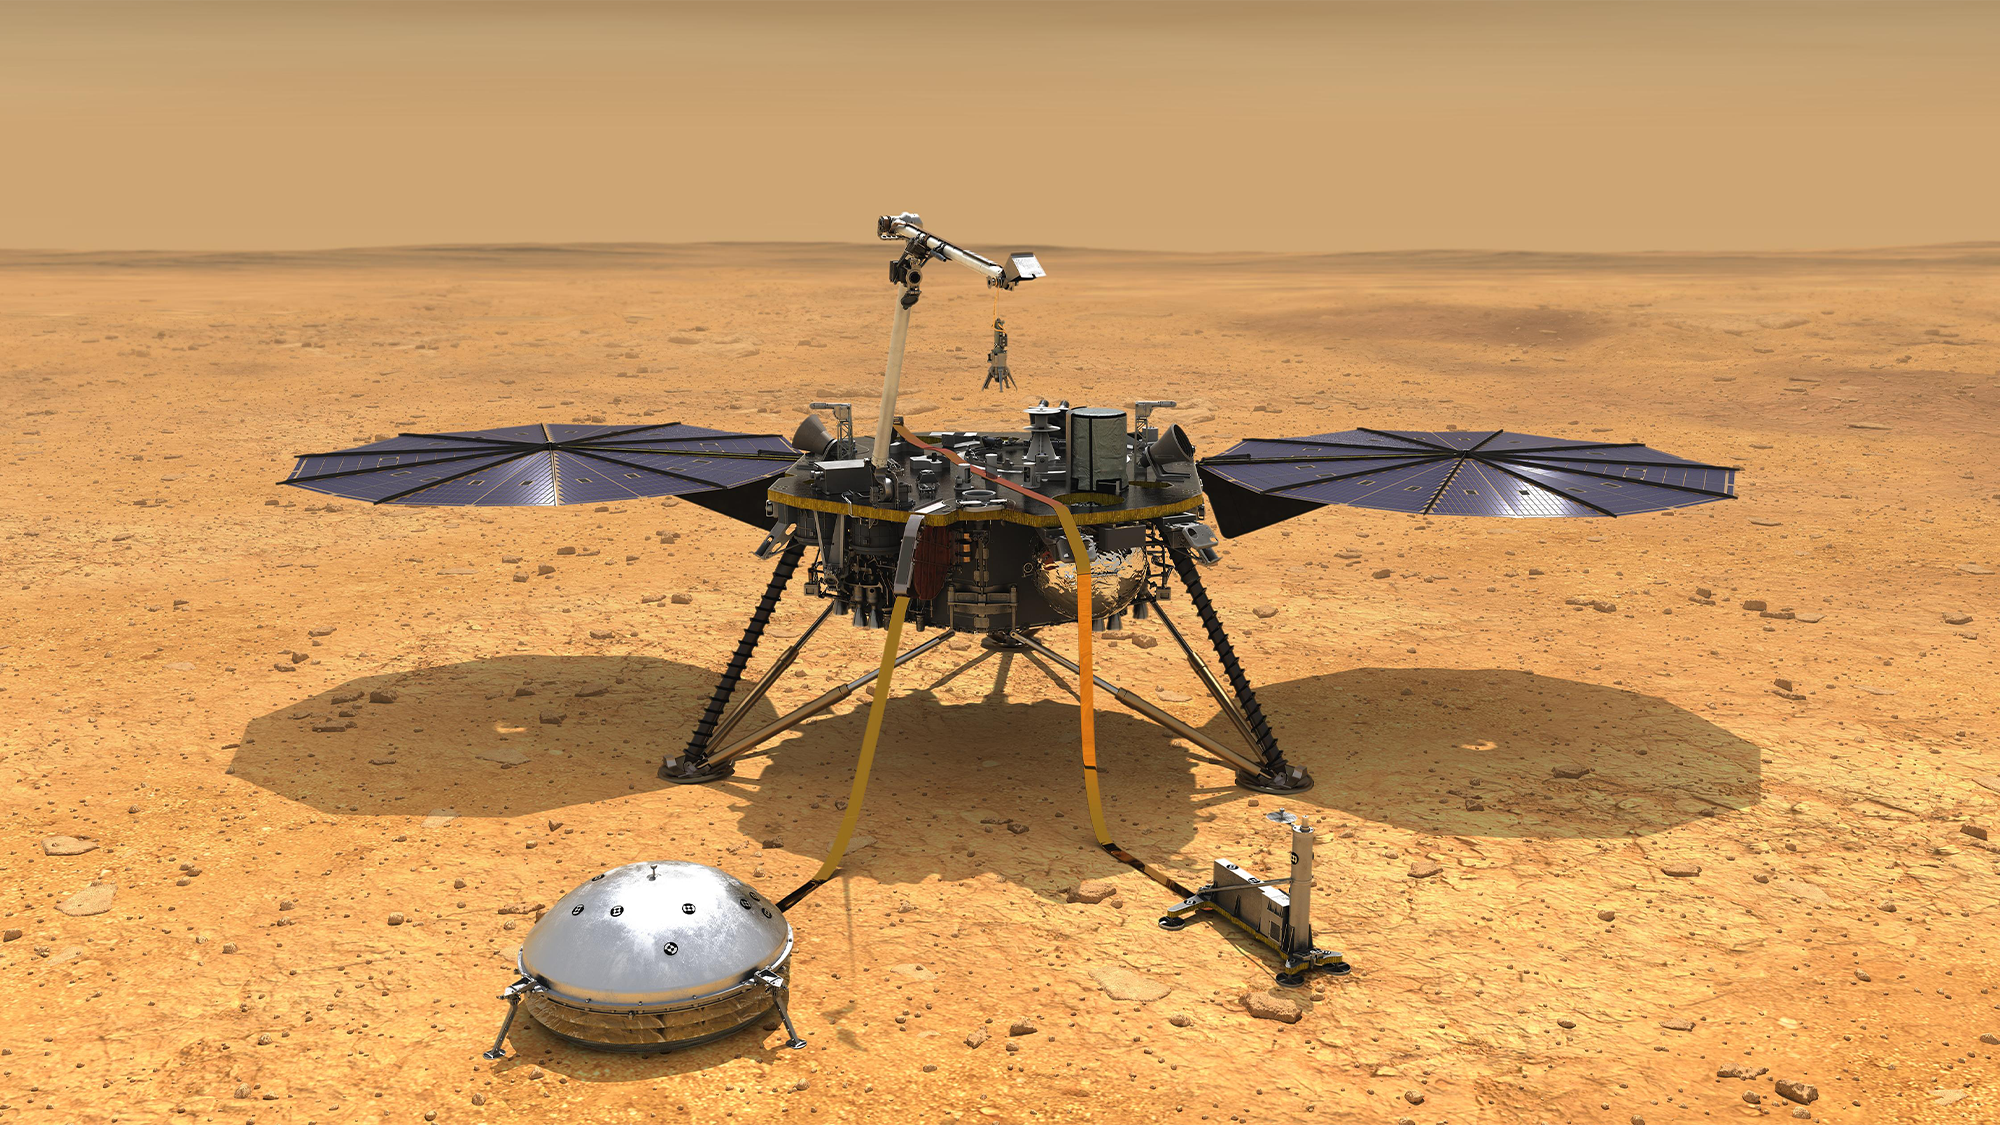 An illustration of NASA's InSight spacecraft with its instruments deployed on the Martian surface.